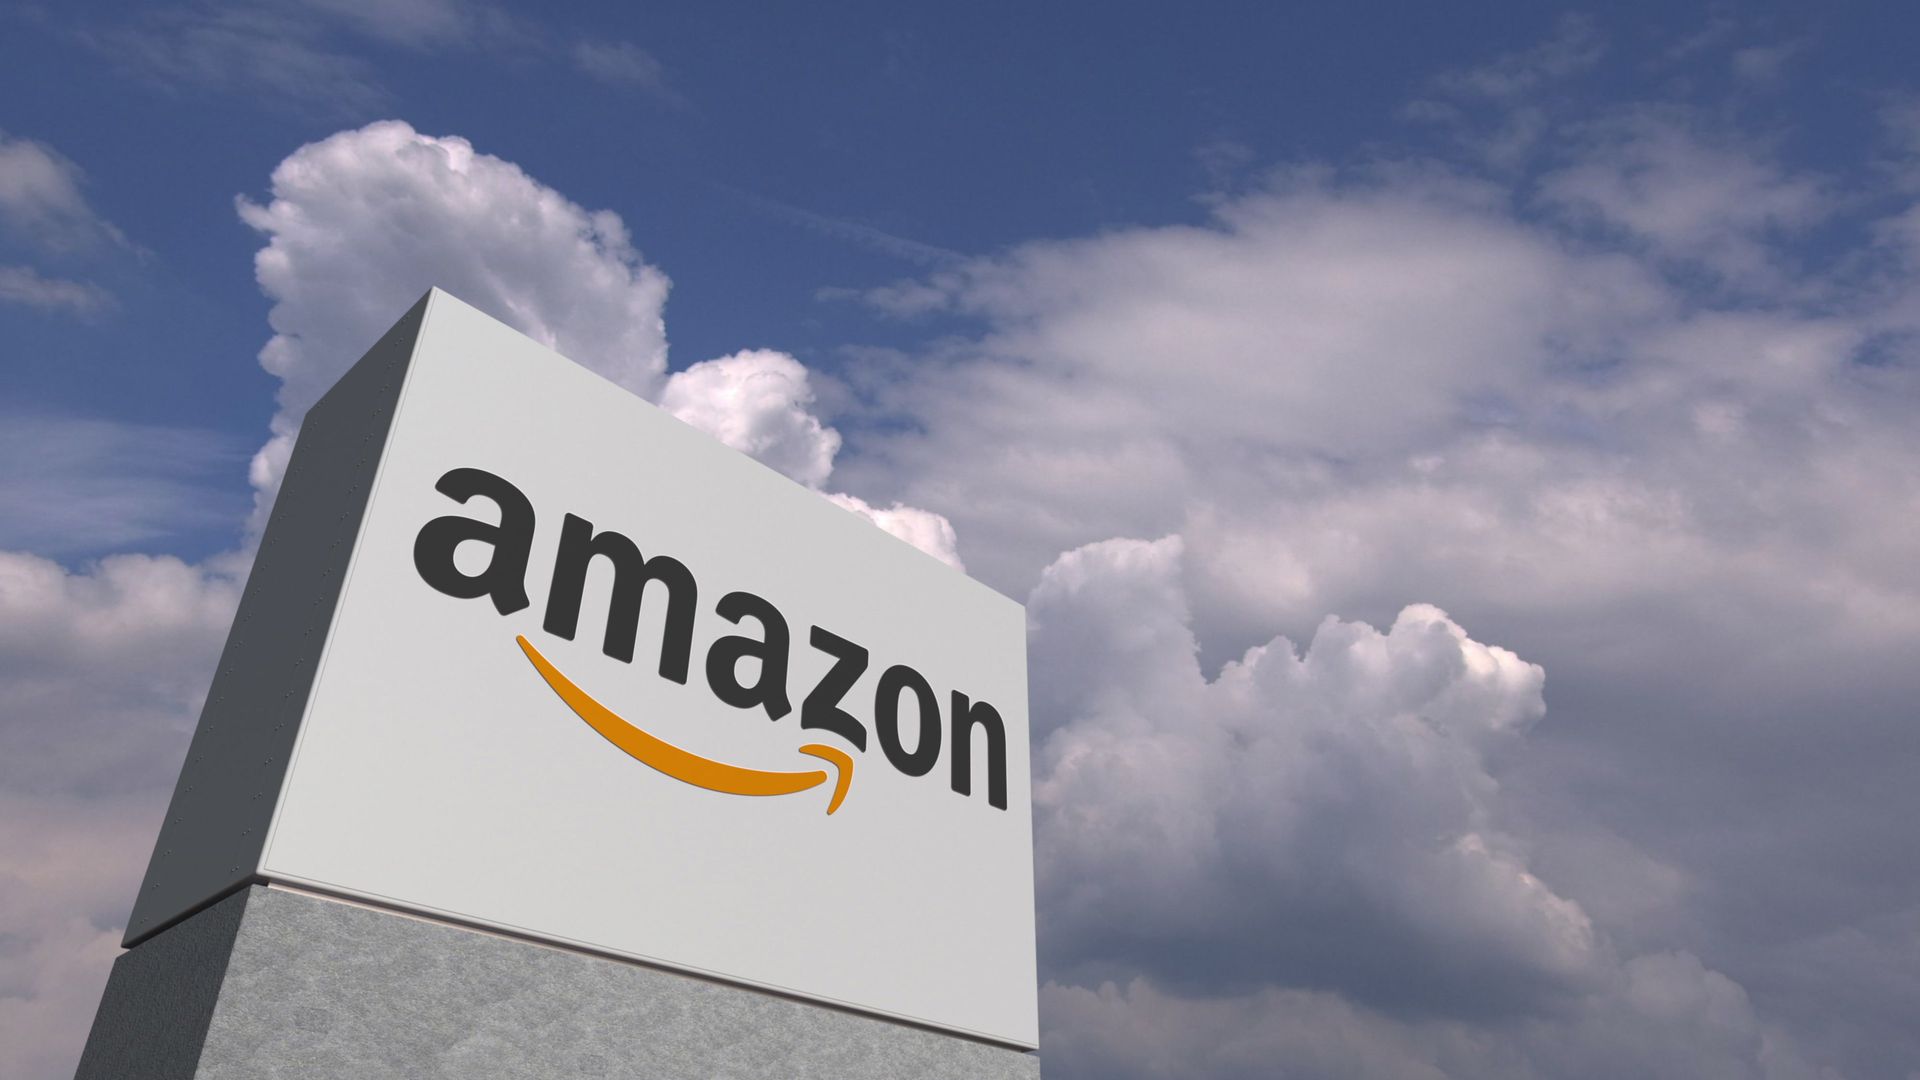 An amazon sign is against a cloudy sky.